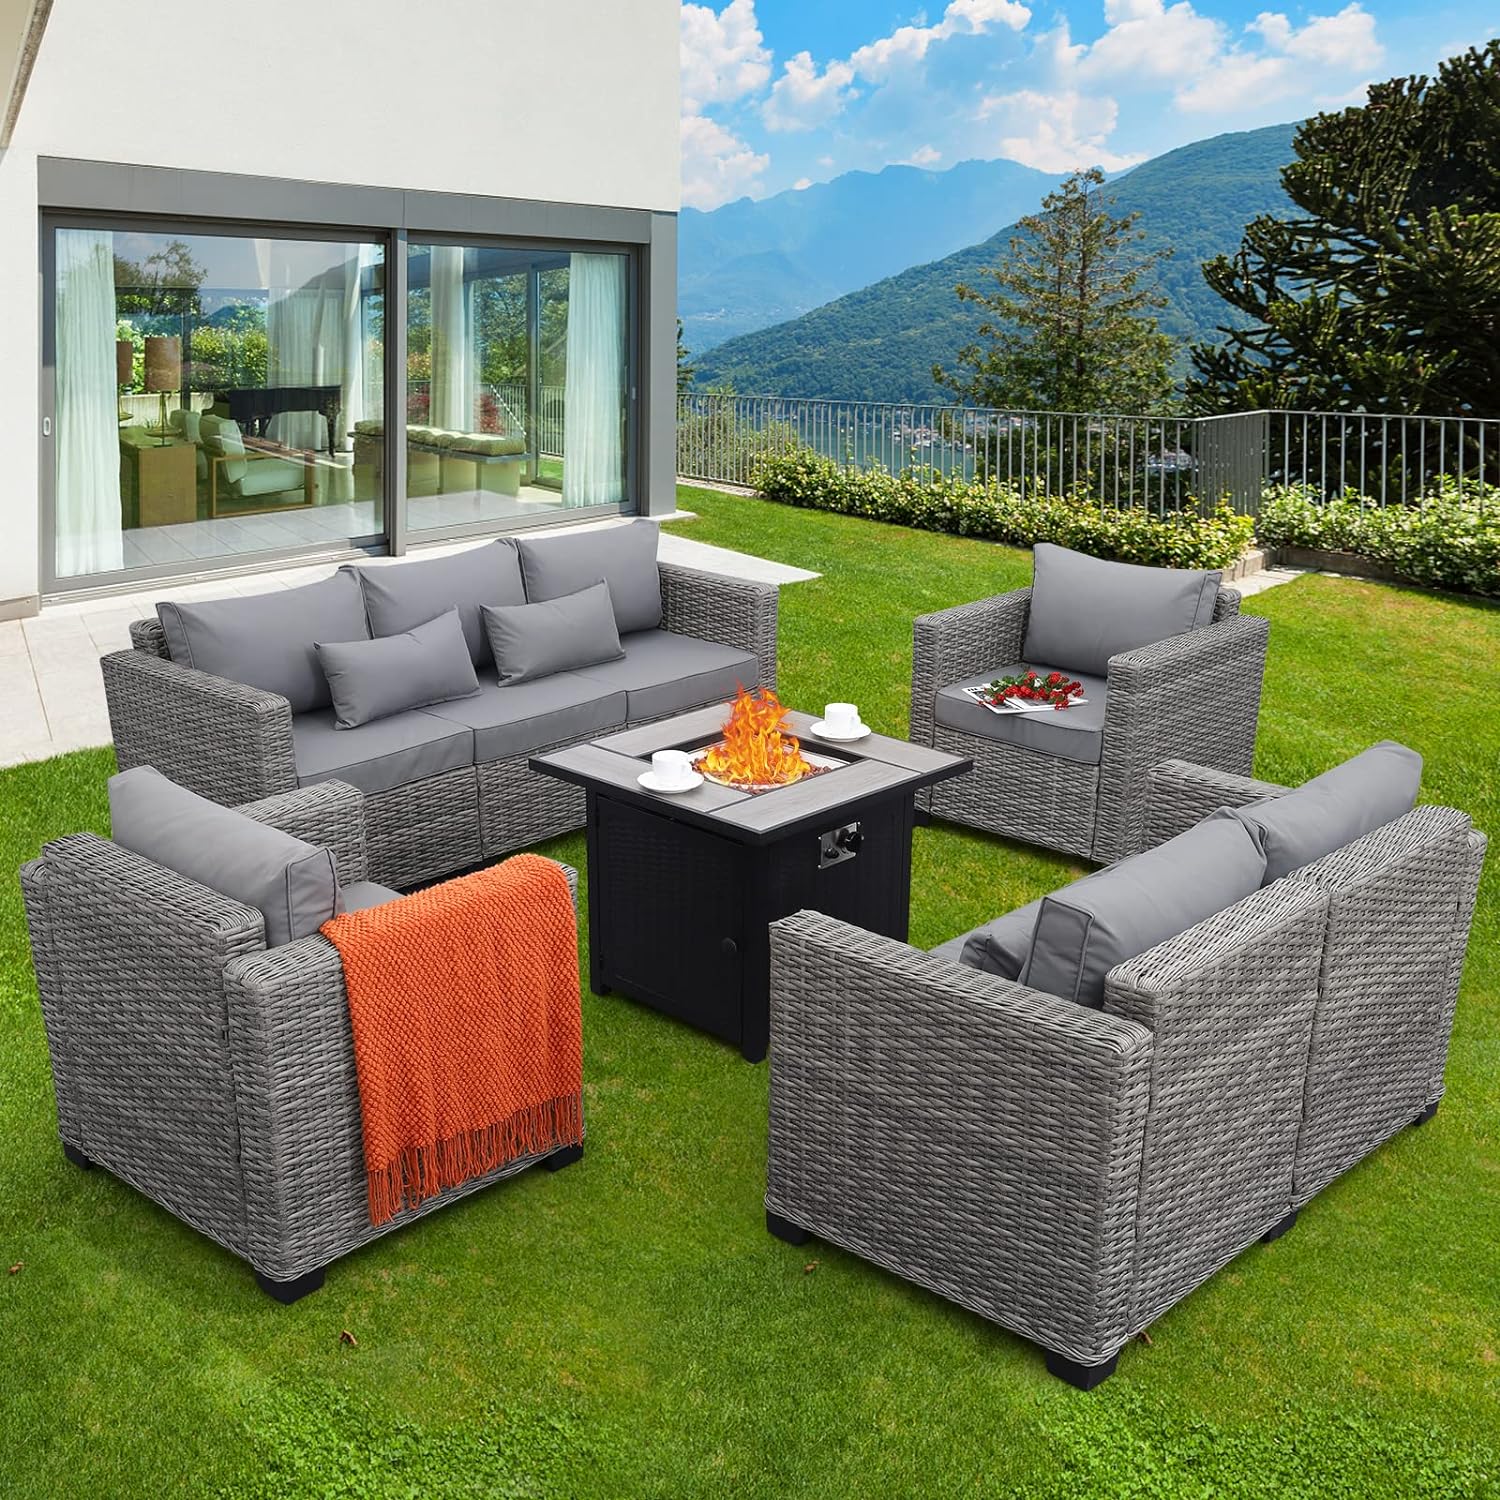 Rattaner 5 PCS Outdoor Furniture Sets Patio Furniture Set with 30-Inch Fire Pit Patio Couch Outdoor Chairs 50000 BTU Wicker Propane Fire Pit Table with No-Slip Cushions and Waterproof Covers, Grey